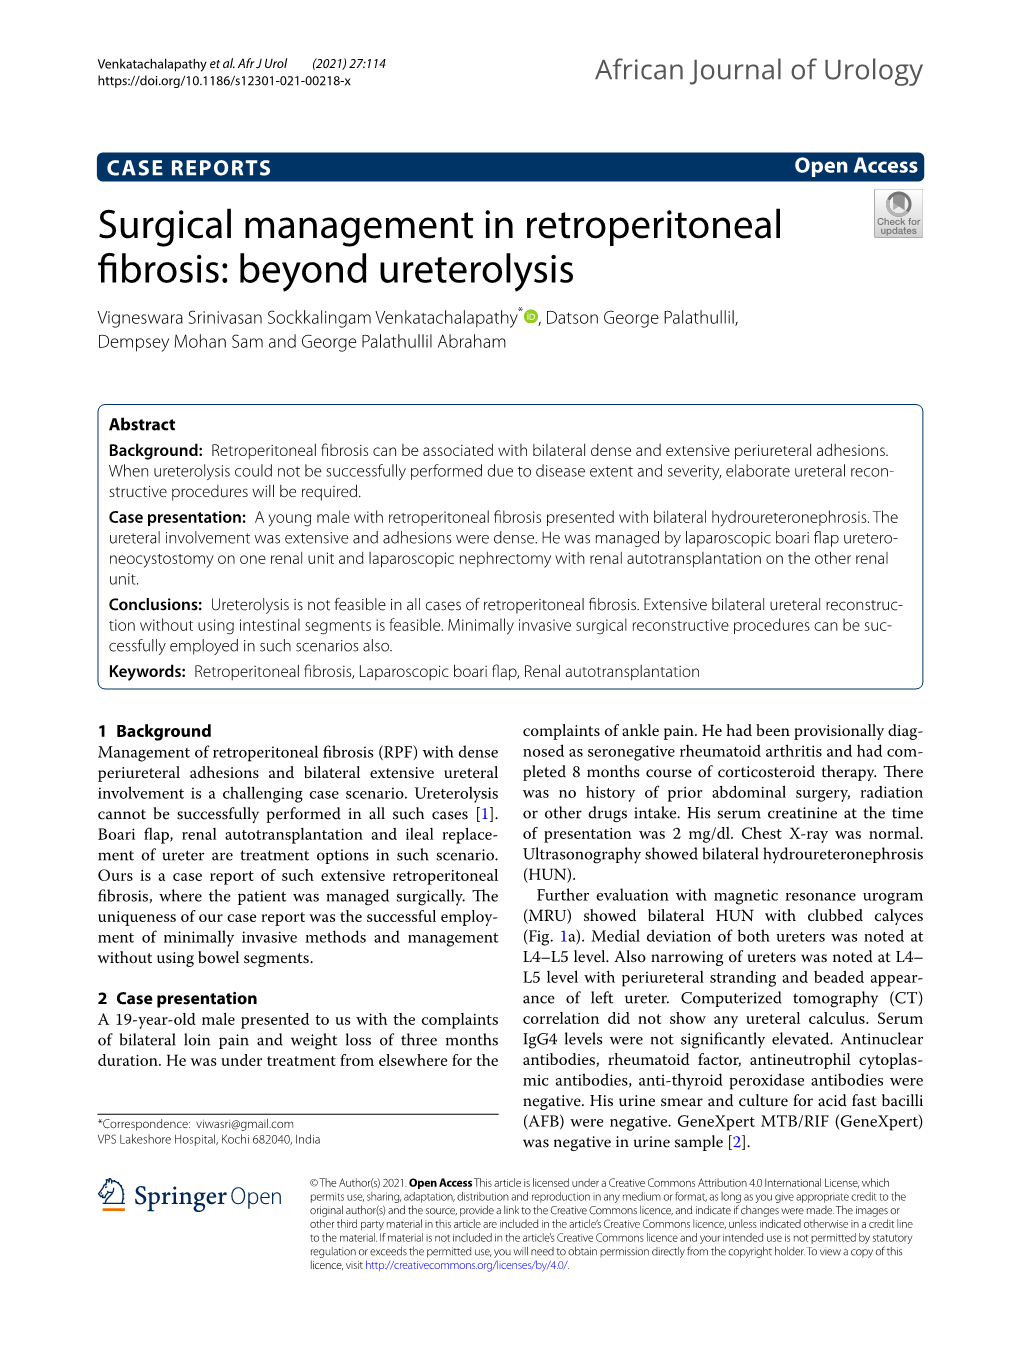 Surgical Management in Retroperitoneal Fibrosis